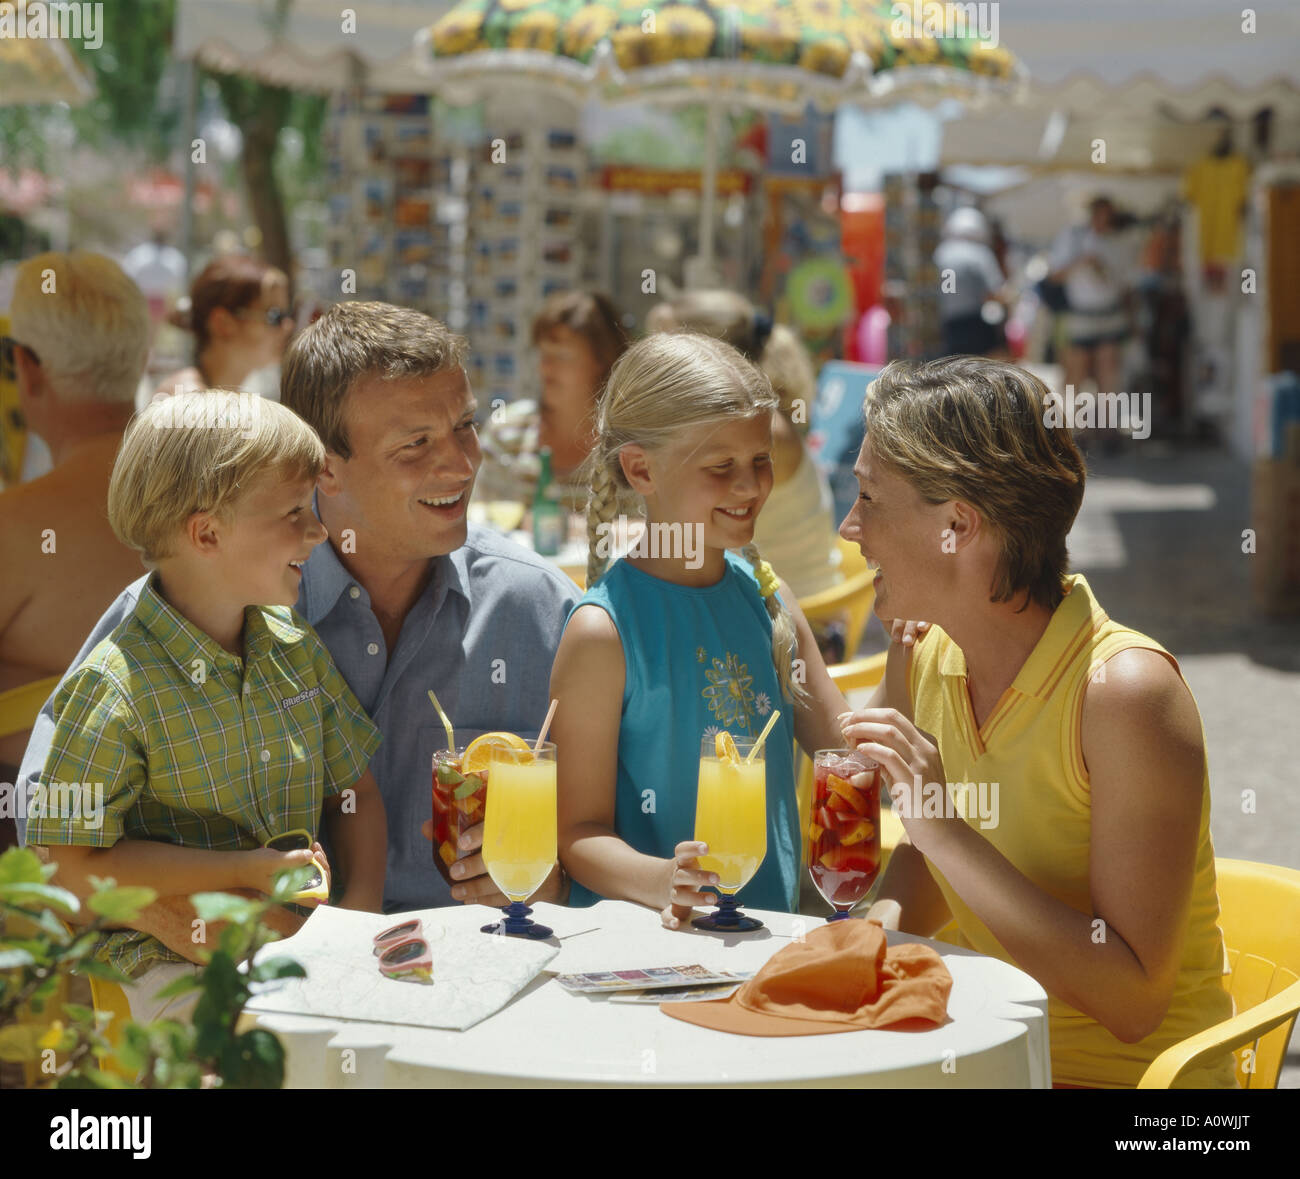 Family drinking on holiday at a street café in Portugal Stock Photo